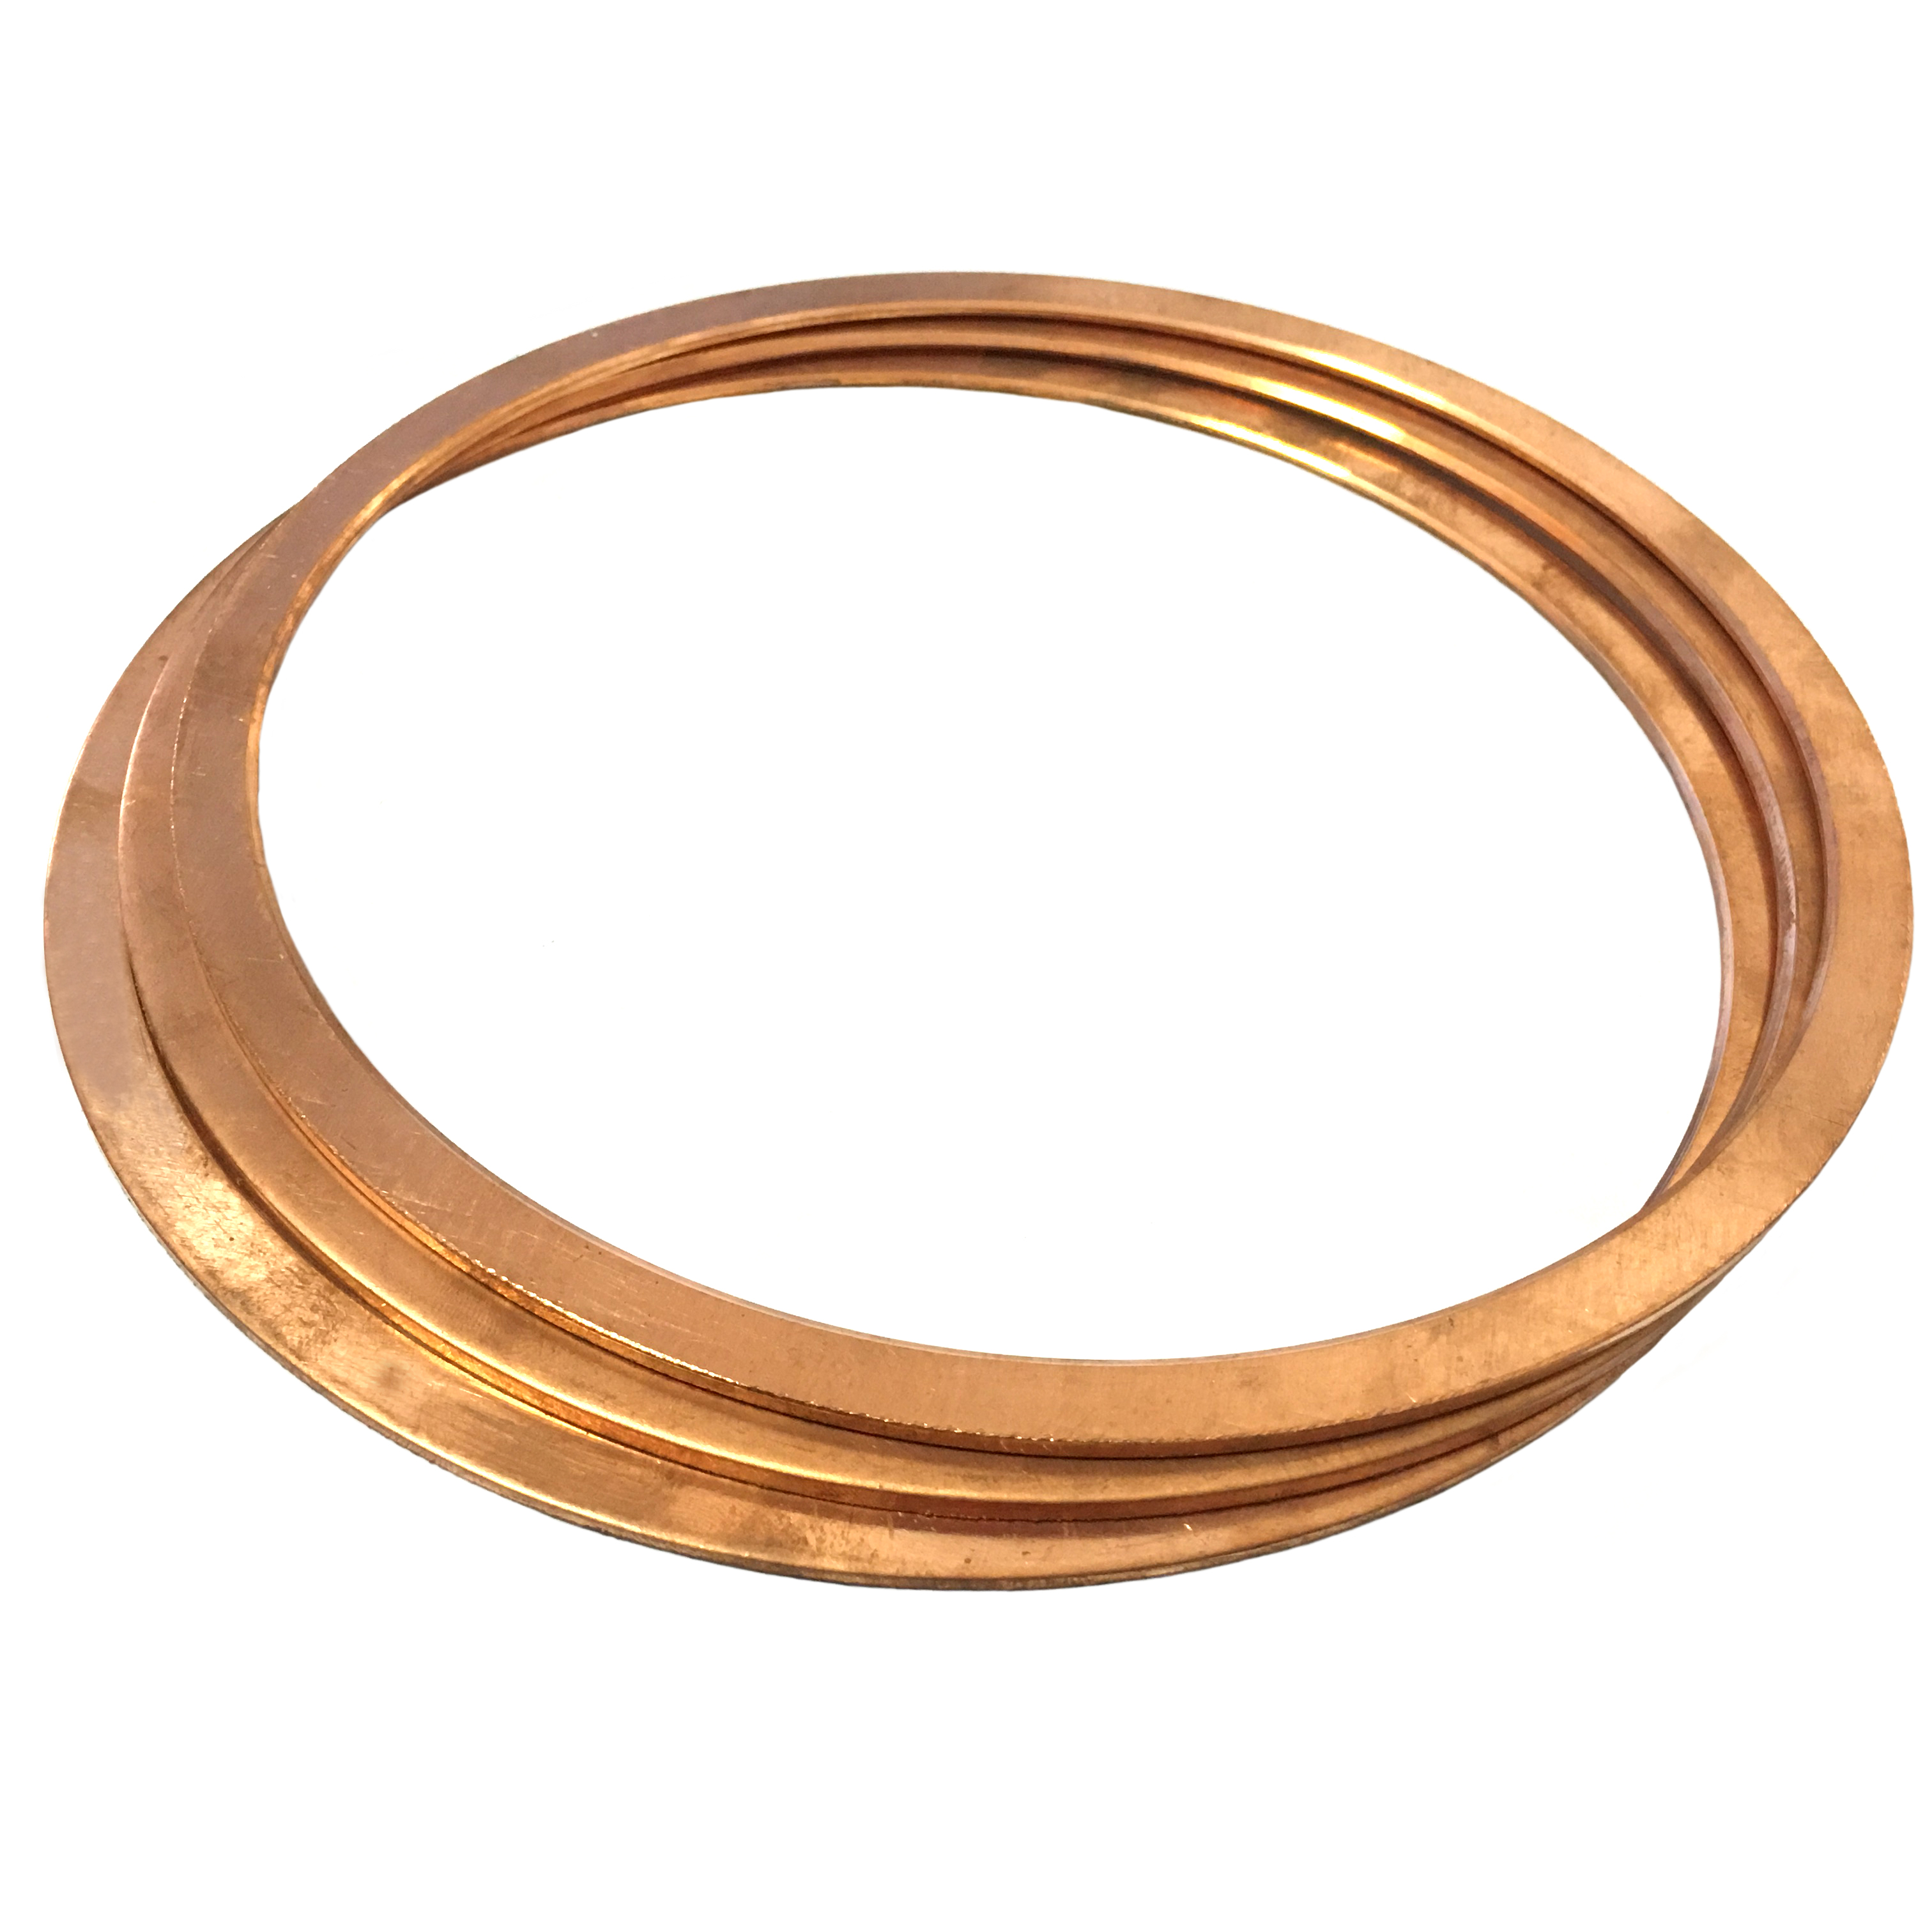 Copper Washer Flat O Ring Gasket 158*174*2/2.5/3